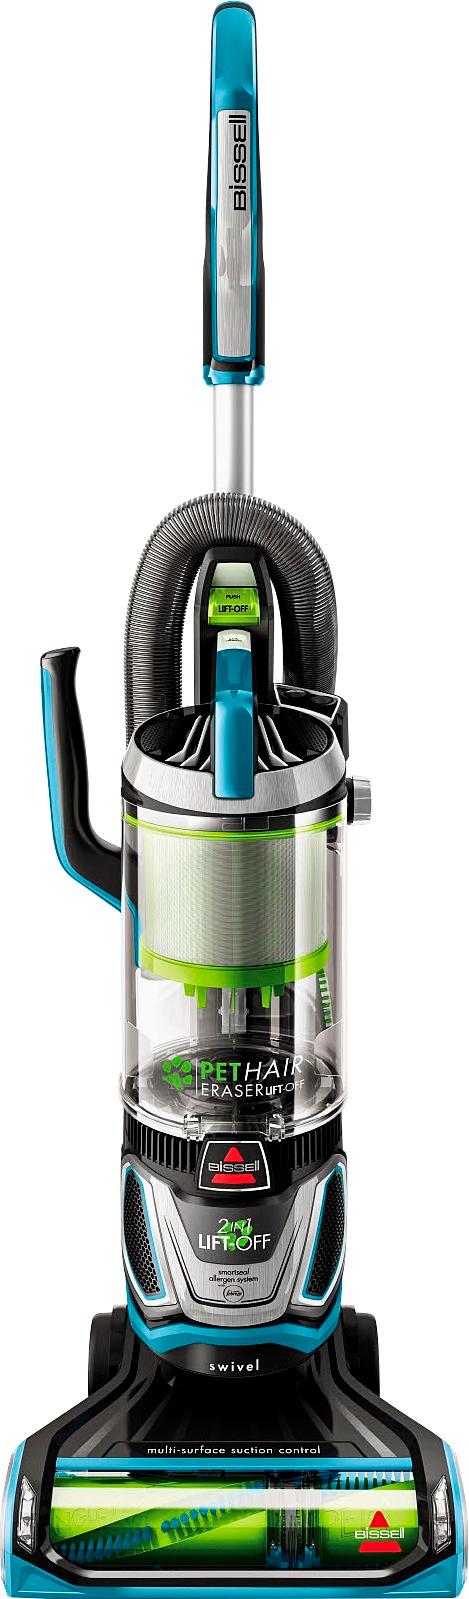 BISSELL - Pet Hair Eraser Lift-Off Upright Vacuum - Disco Teal was $299.99 now $149.99 (50.0% off)